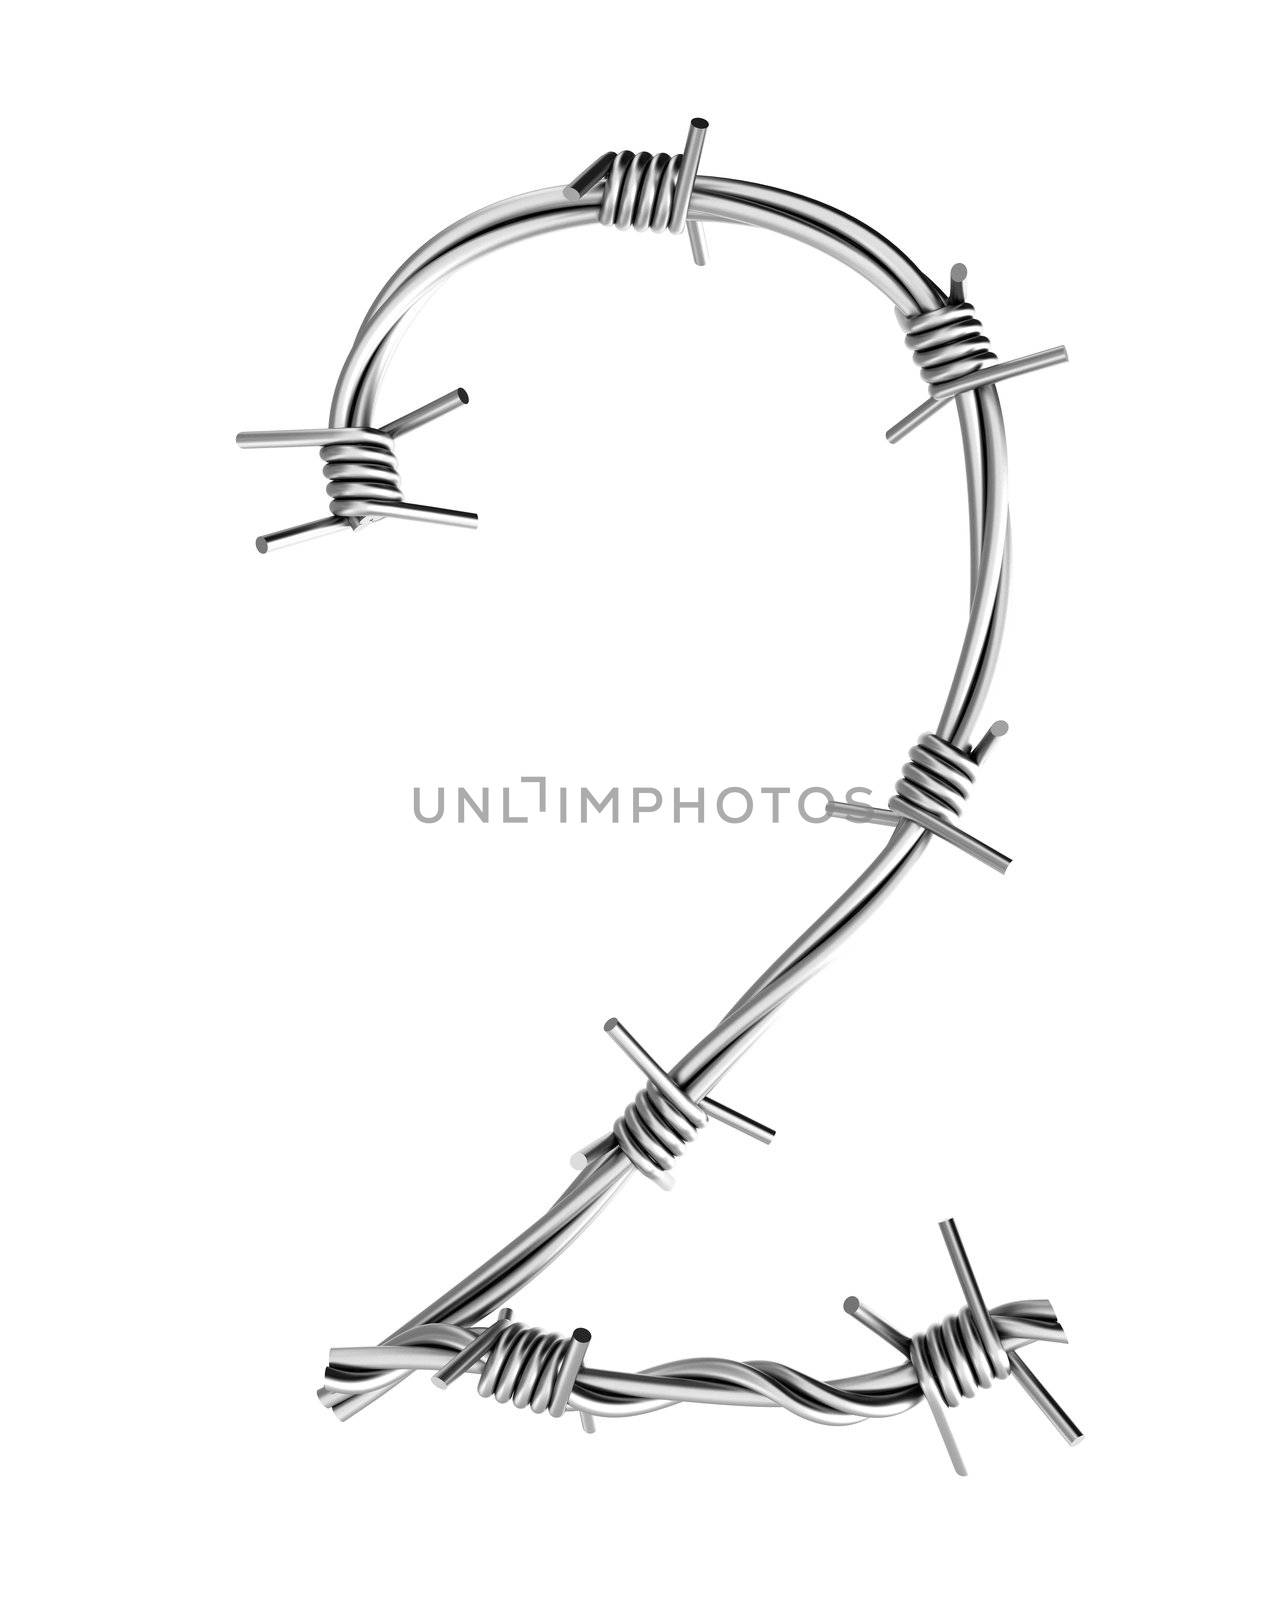 Letter made from barbed wire